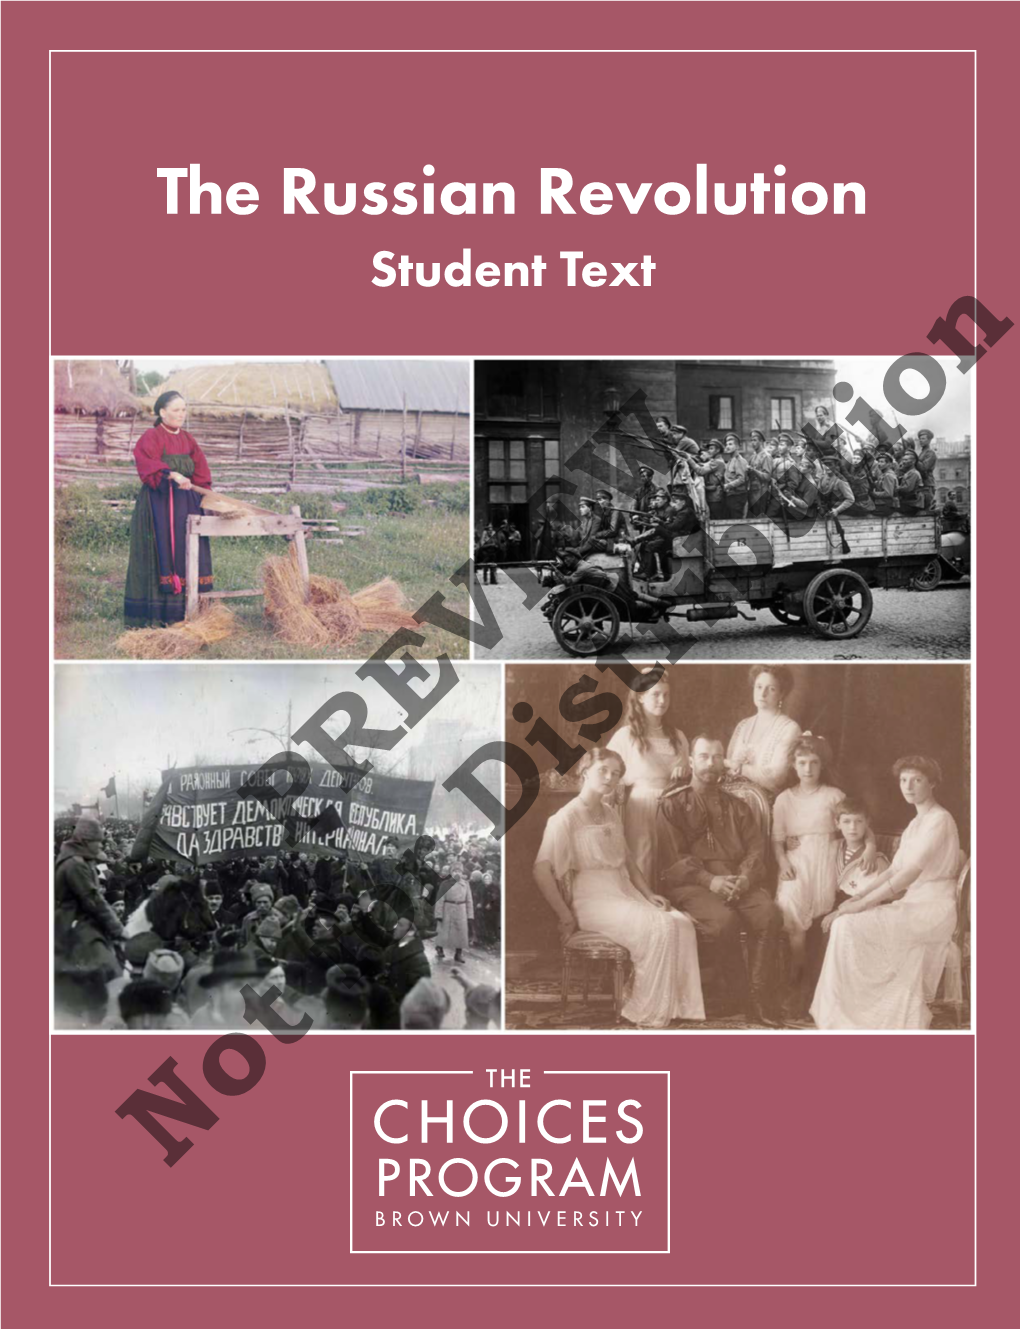 The Russian Revolution Student Text